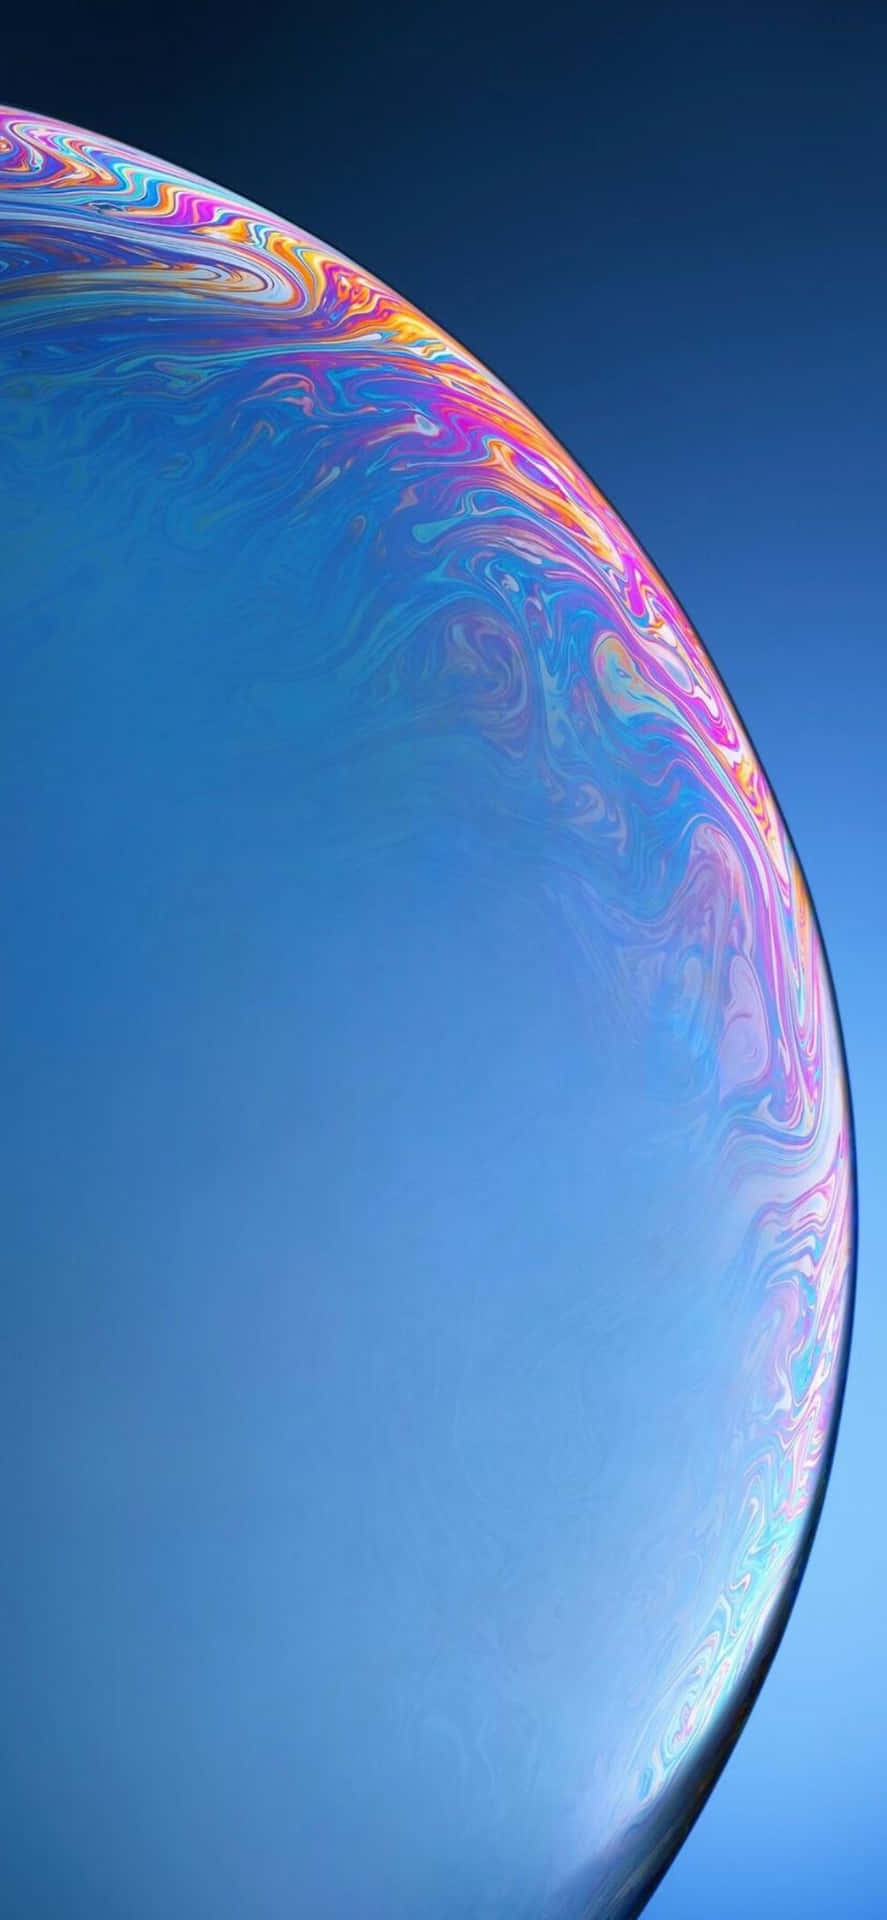 A Close Up Of A Blue Bubble With A Colorful Background